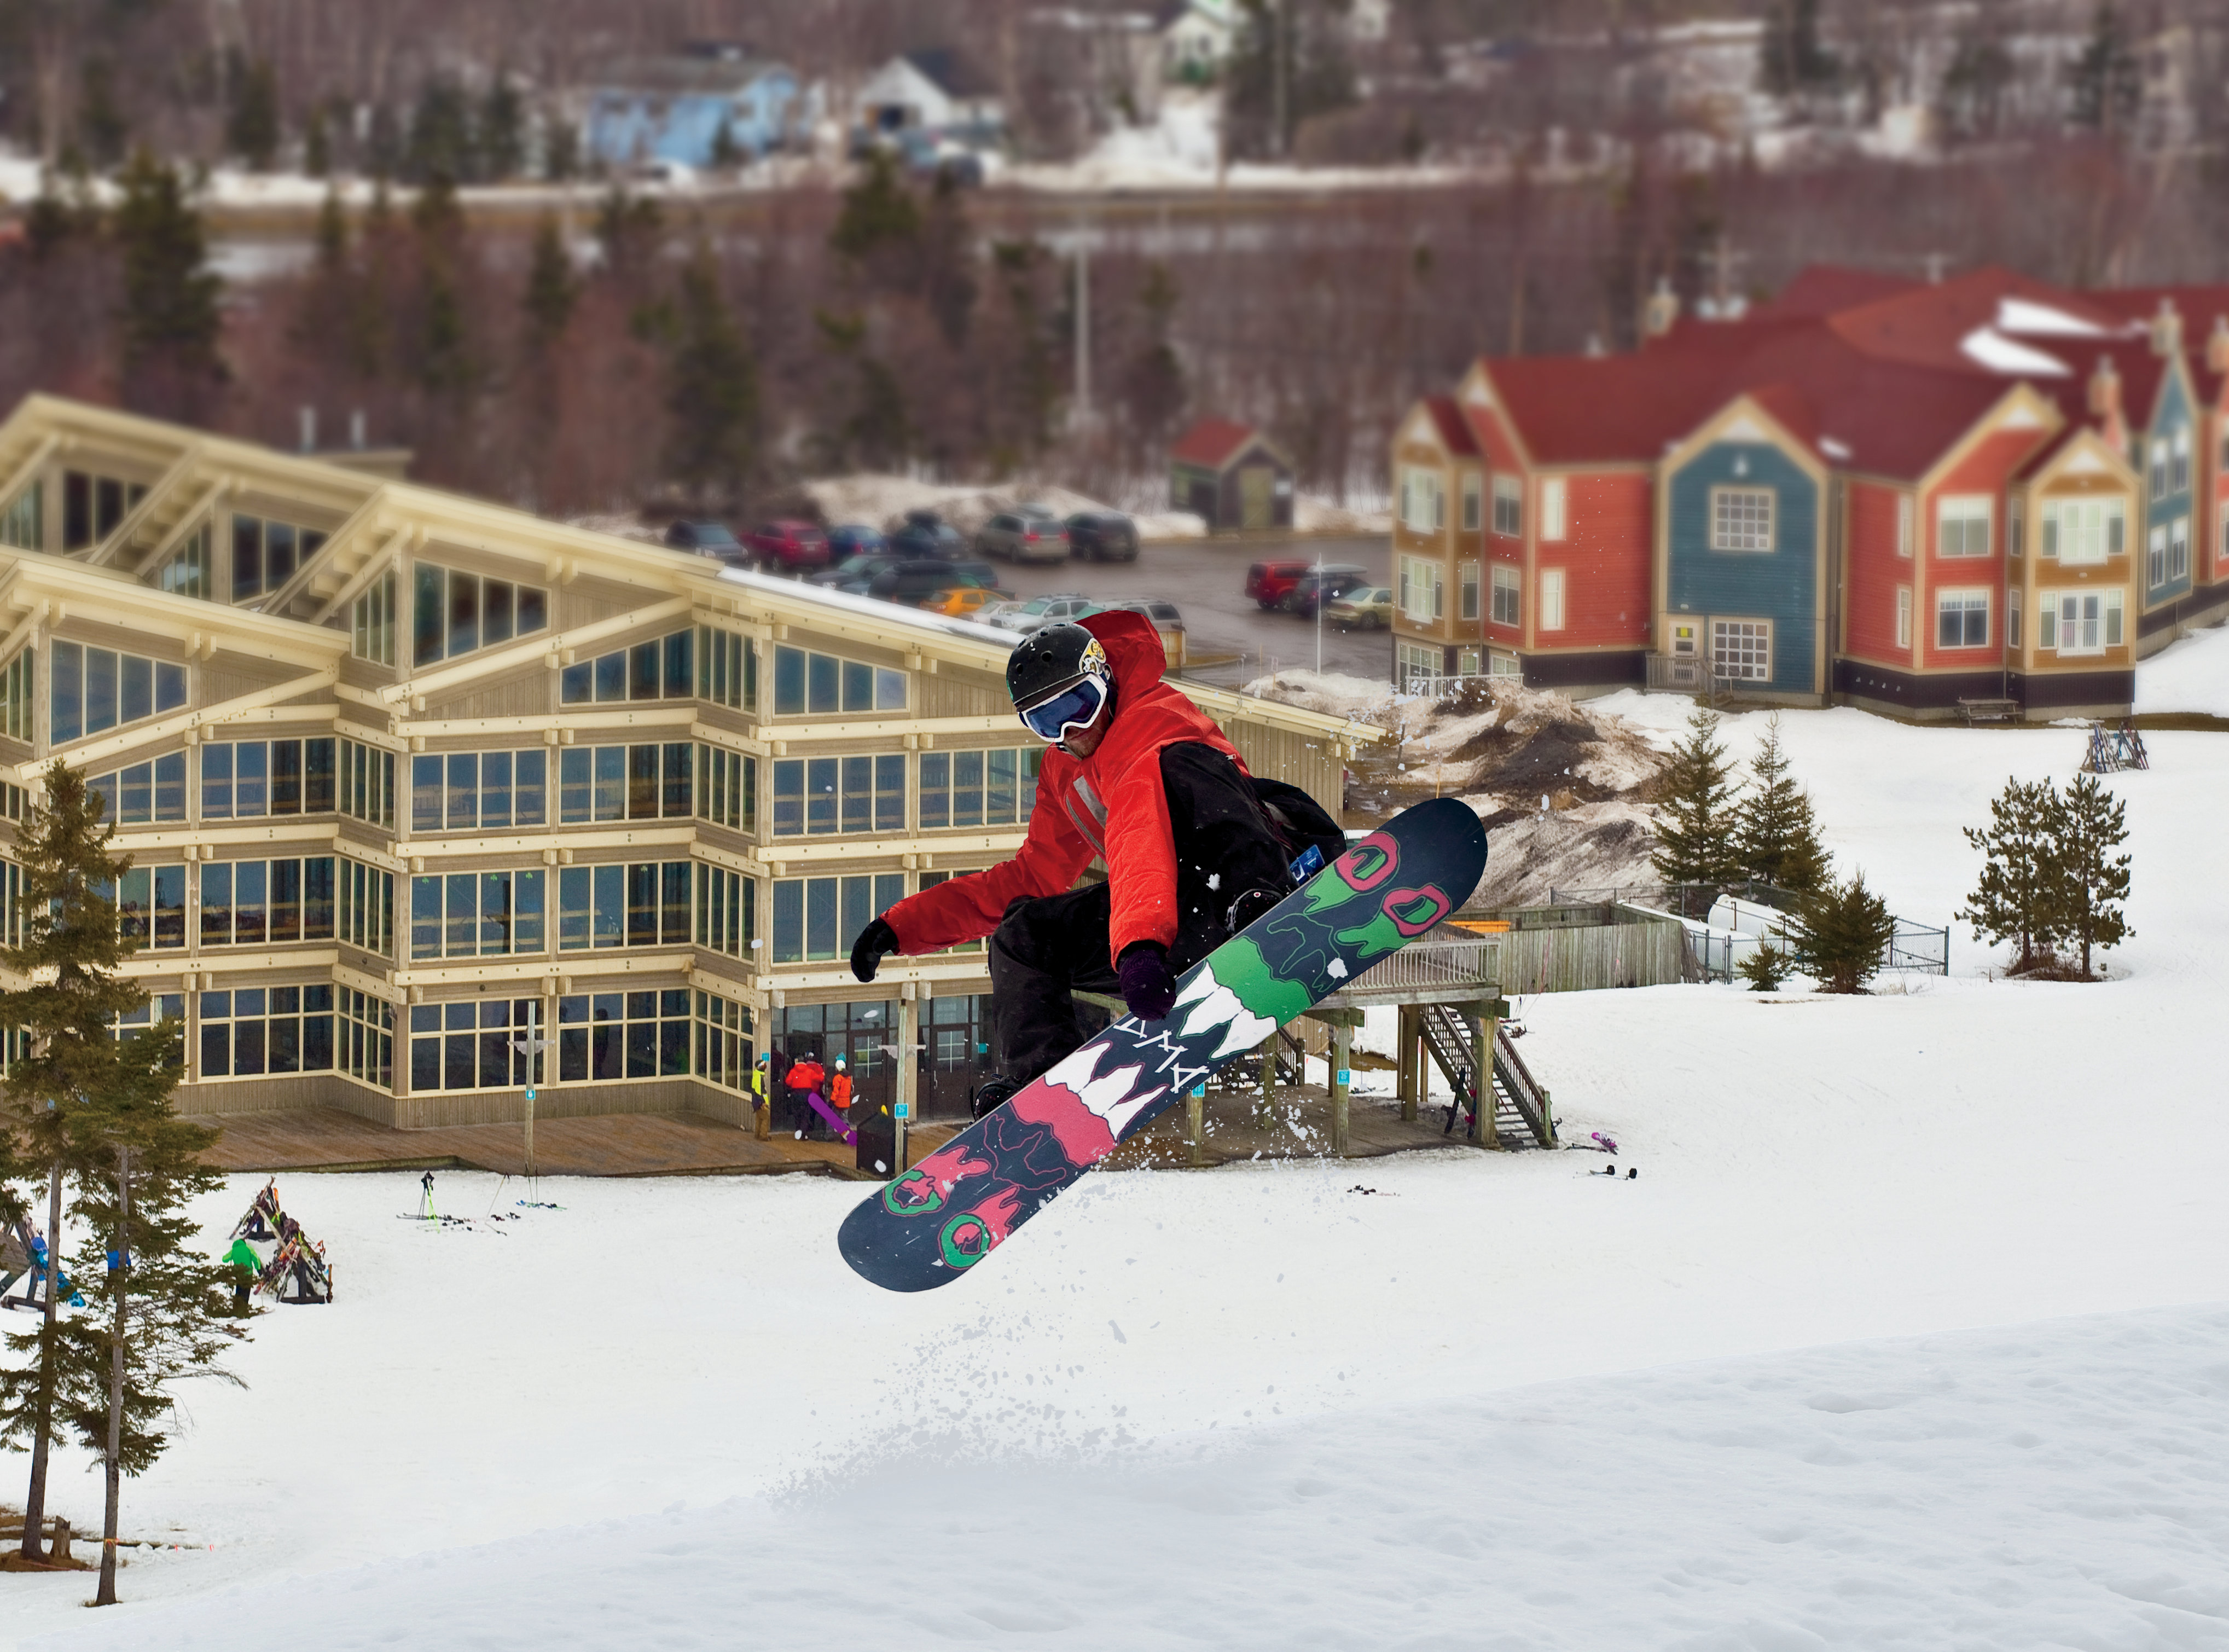 Snowboarding At Marble - Credit to NL Tourism